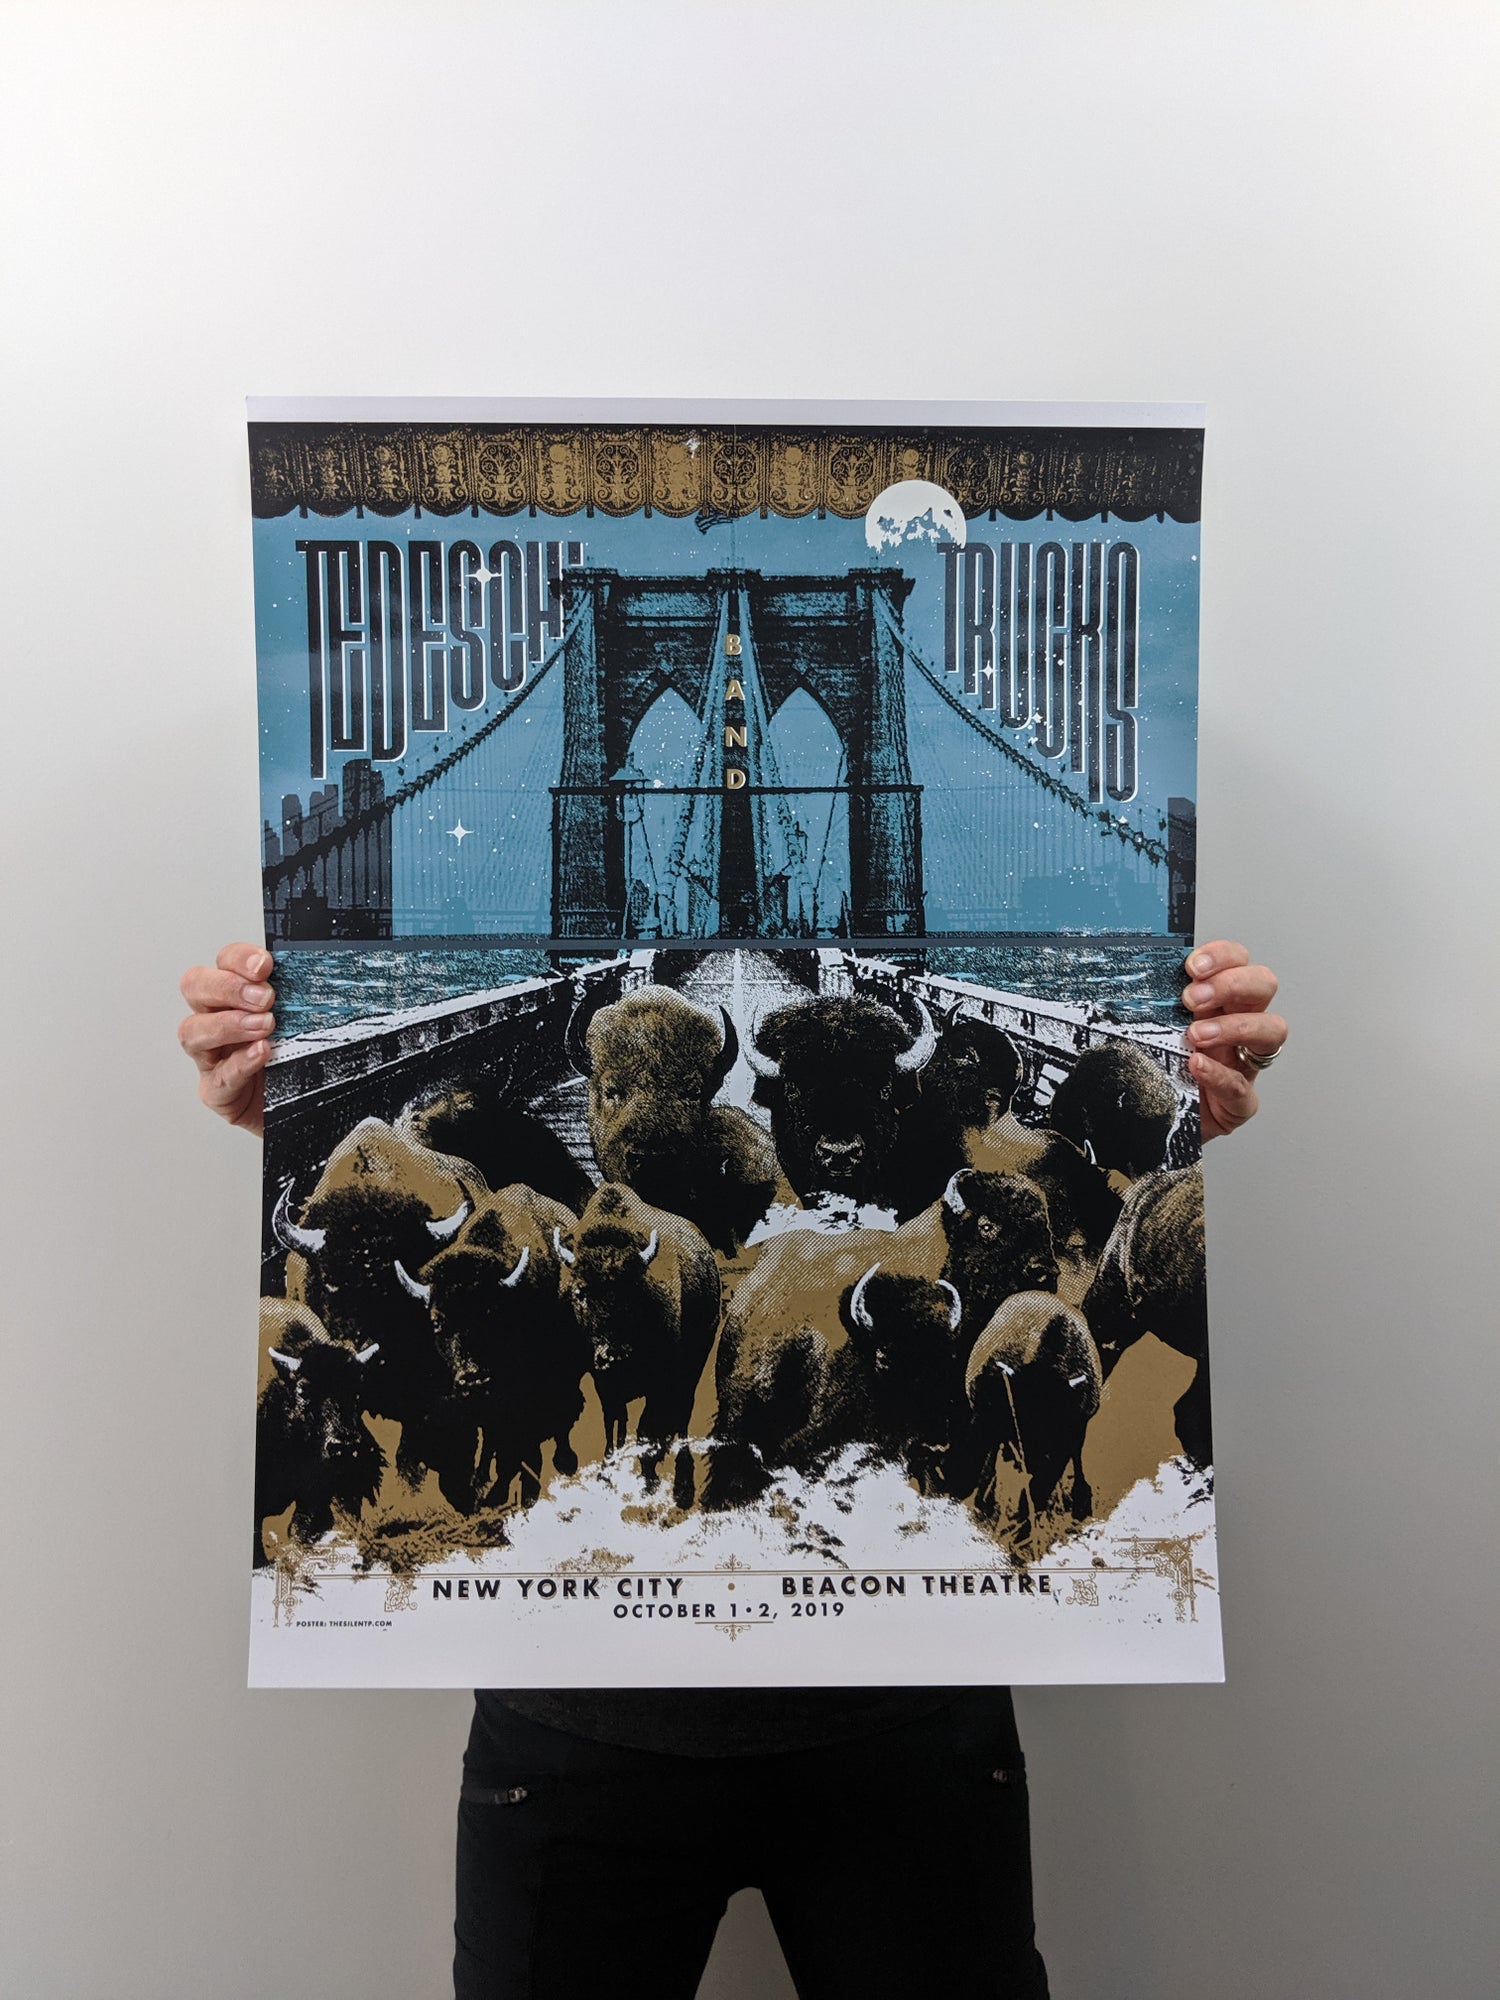 Title: Tedeschi Trucks Band - NYC - 2019 (Full triptych sets available)  Edition: Limited Edition, Signed and numbered APs.  Type:  Five color limited edition triptych is printed full bleed so that all three posters can be framed/hung together as shown in the image.  Gold metallic and glow in the dark ink add special print touches  Size: Full triptych size: 54” x 24”  Individual poster size: 18” x 24”  Notes:  **THESE PRINTS ALL SOLD OUT IN NEW YORK**